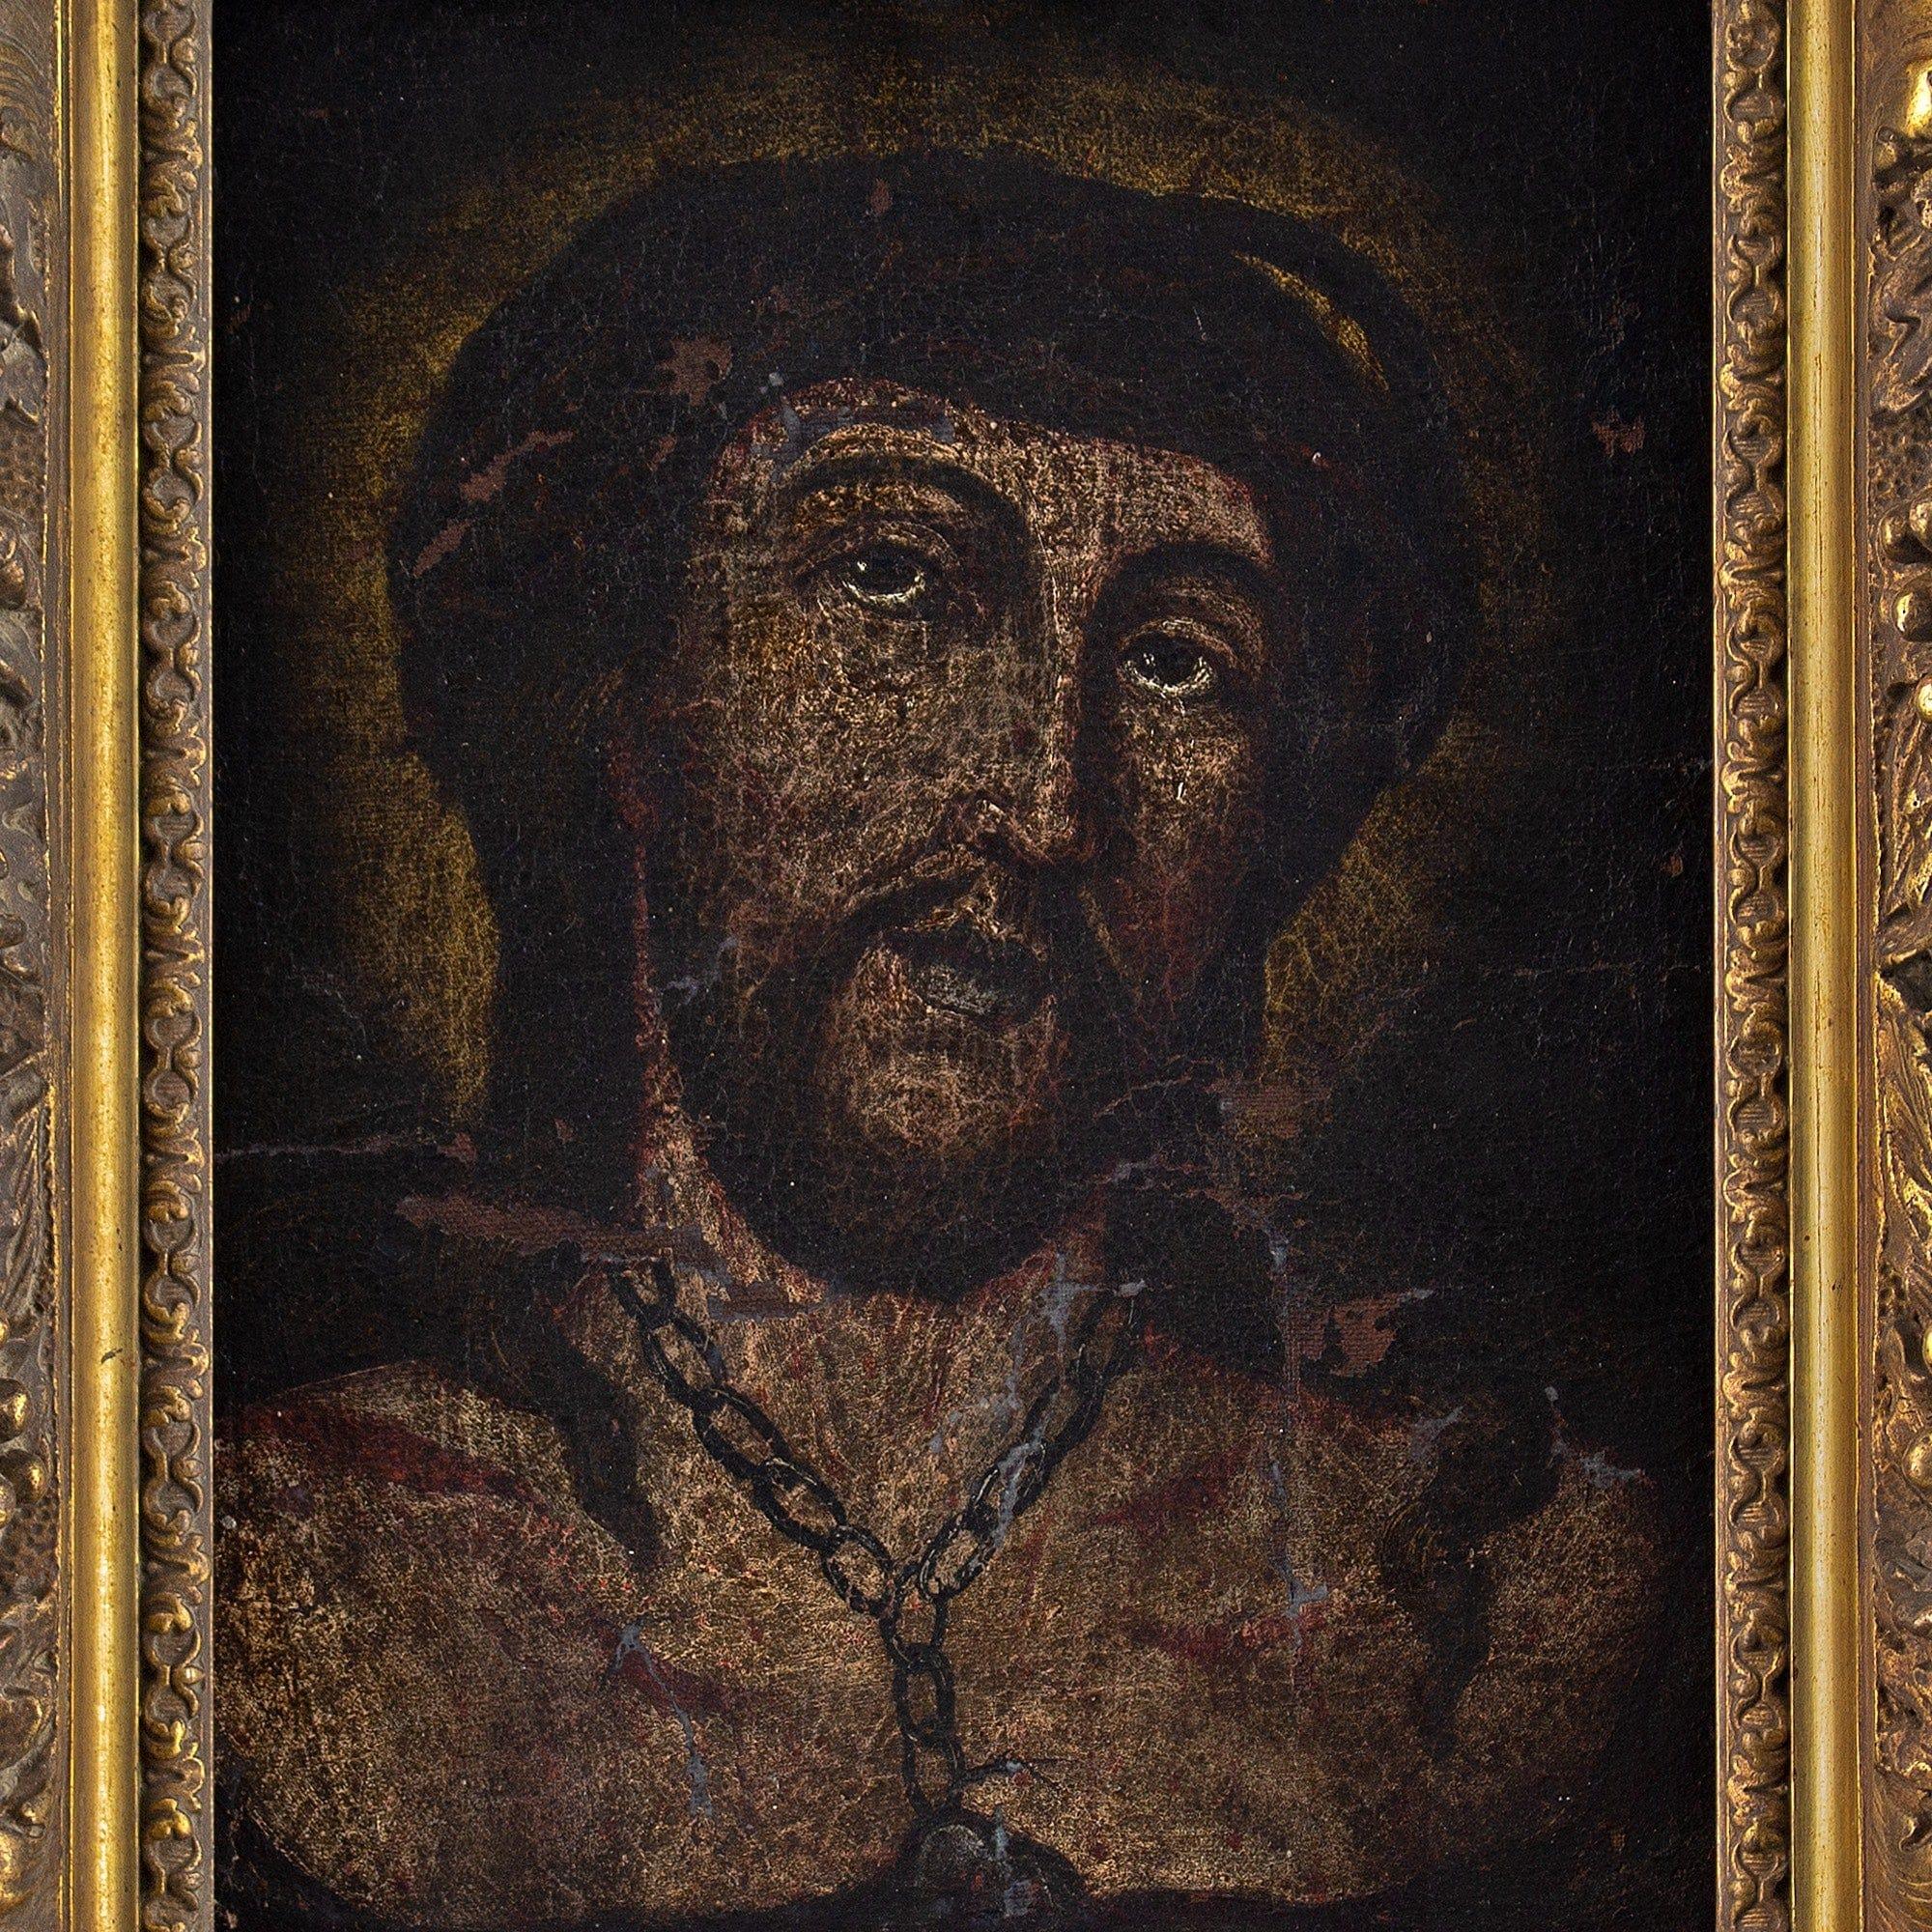 An evocative 17th-century oil on canvas depicting Christ wearing a crown of thorns and a heavy chain. He looks up towards the heavens with an expression of hope - while his eyes are laden with tears.

Throughout the centuries, ‘the Passion’, which